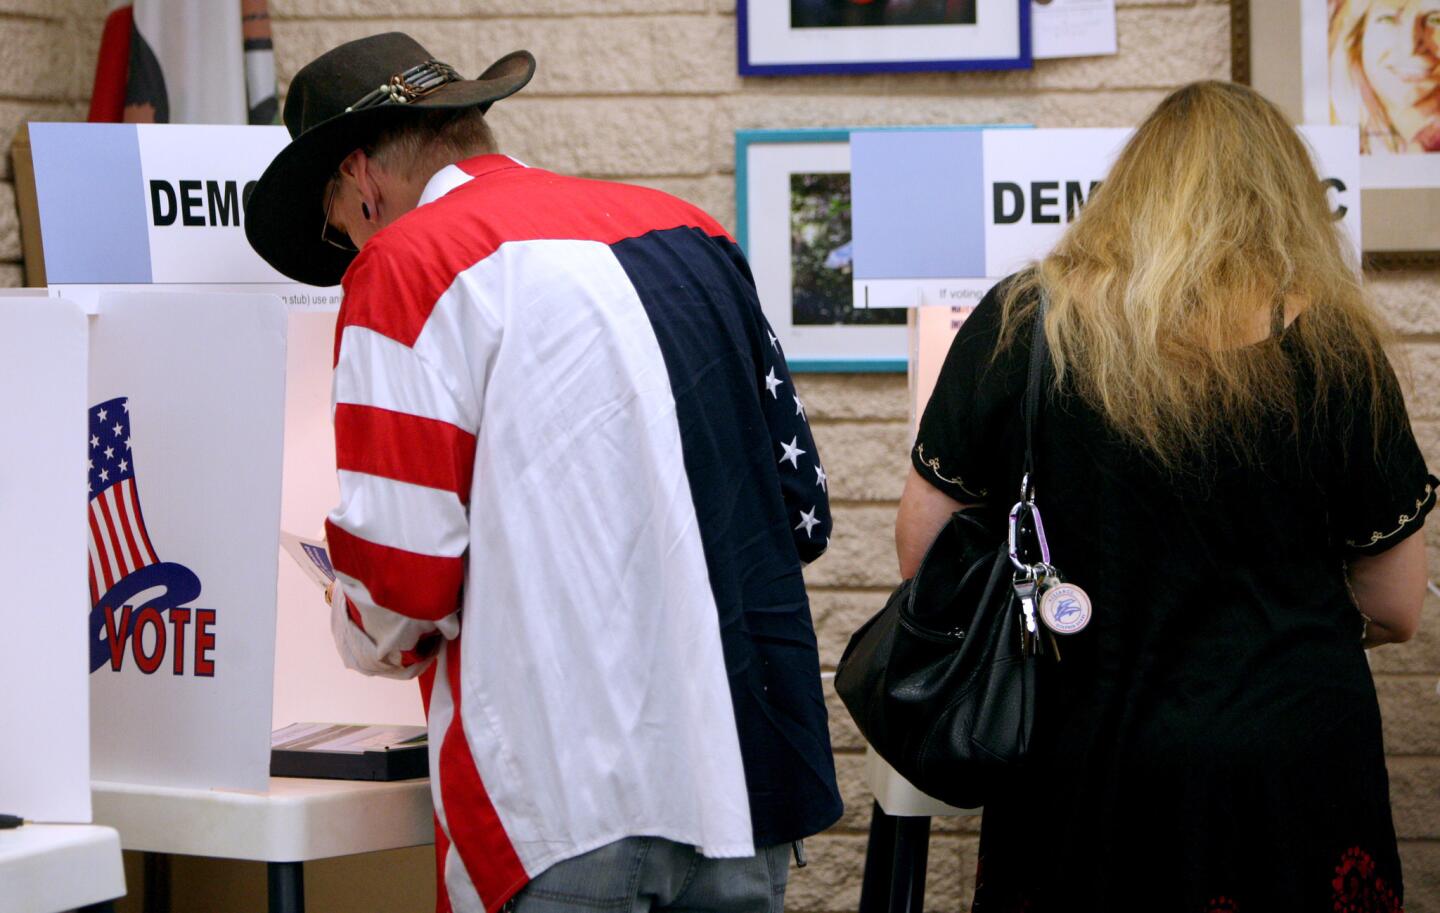 Photo Gallery: Locals turn out to vote at the public library in La Cañada Flintridge